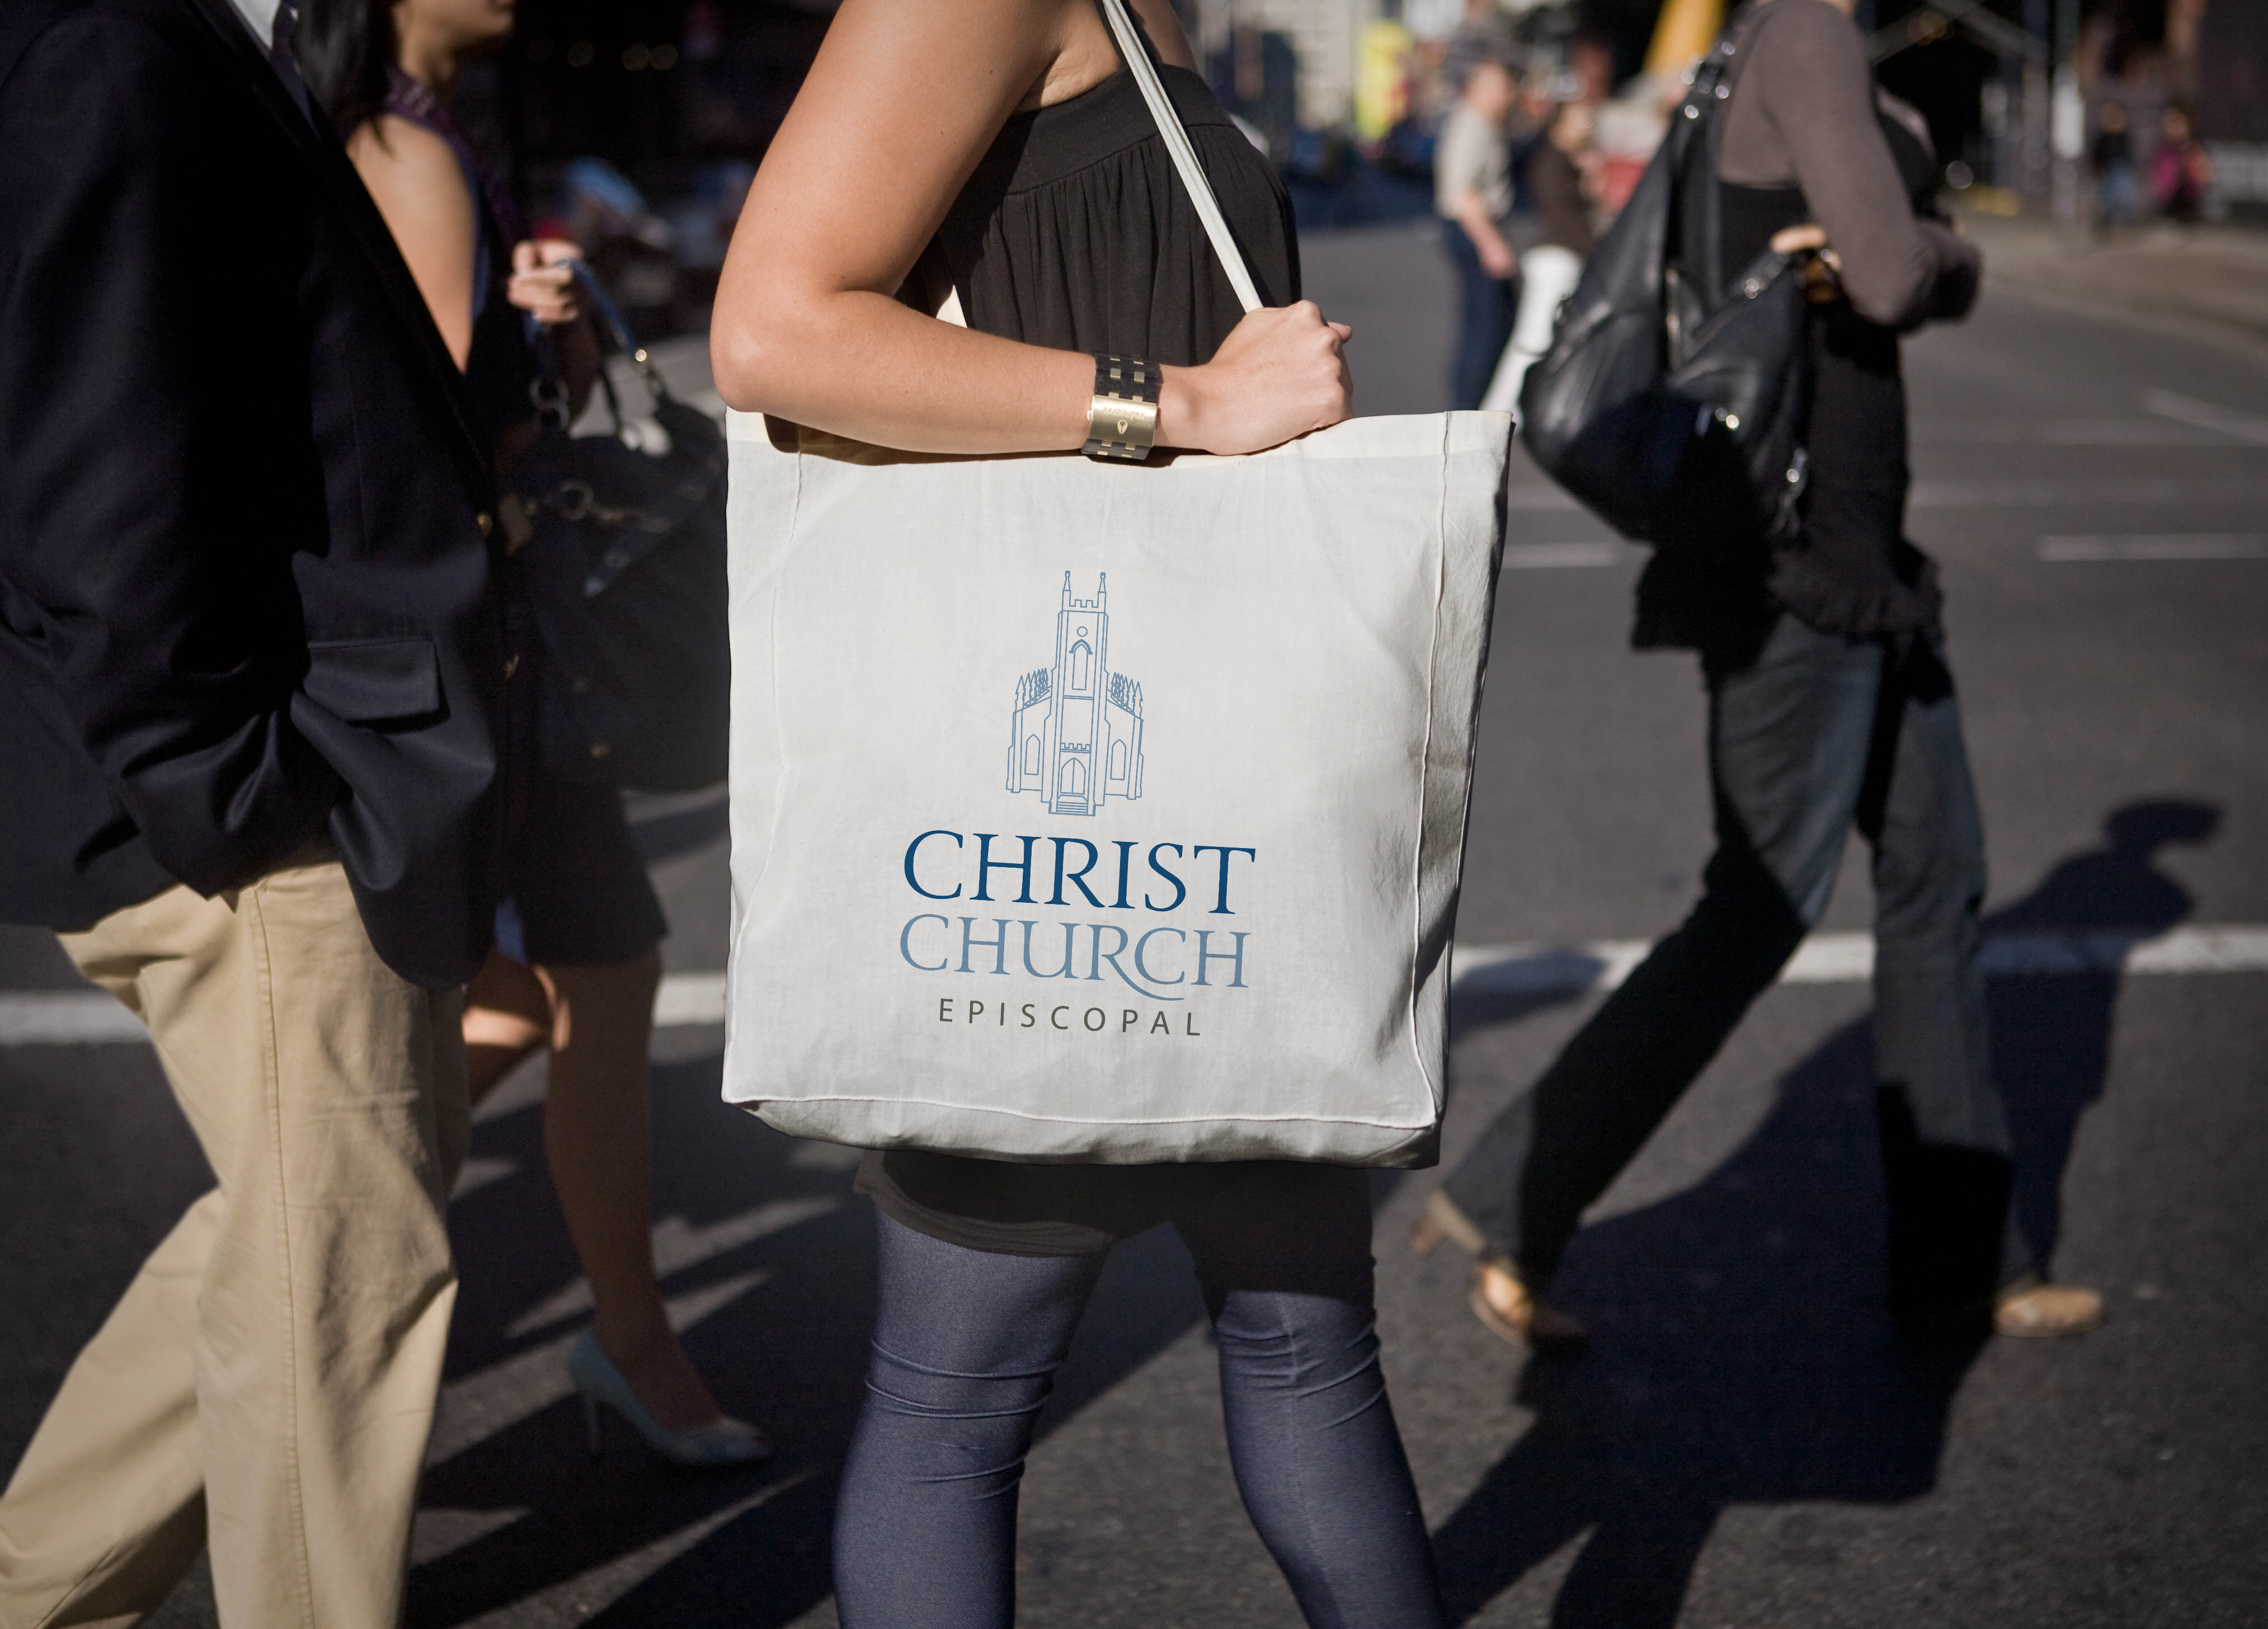 logo design for Christ Church Macon shown on a white tote bag held by a young woman